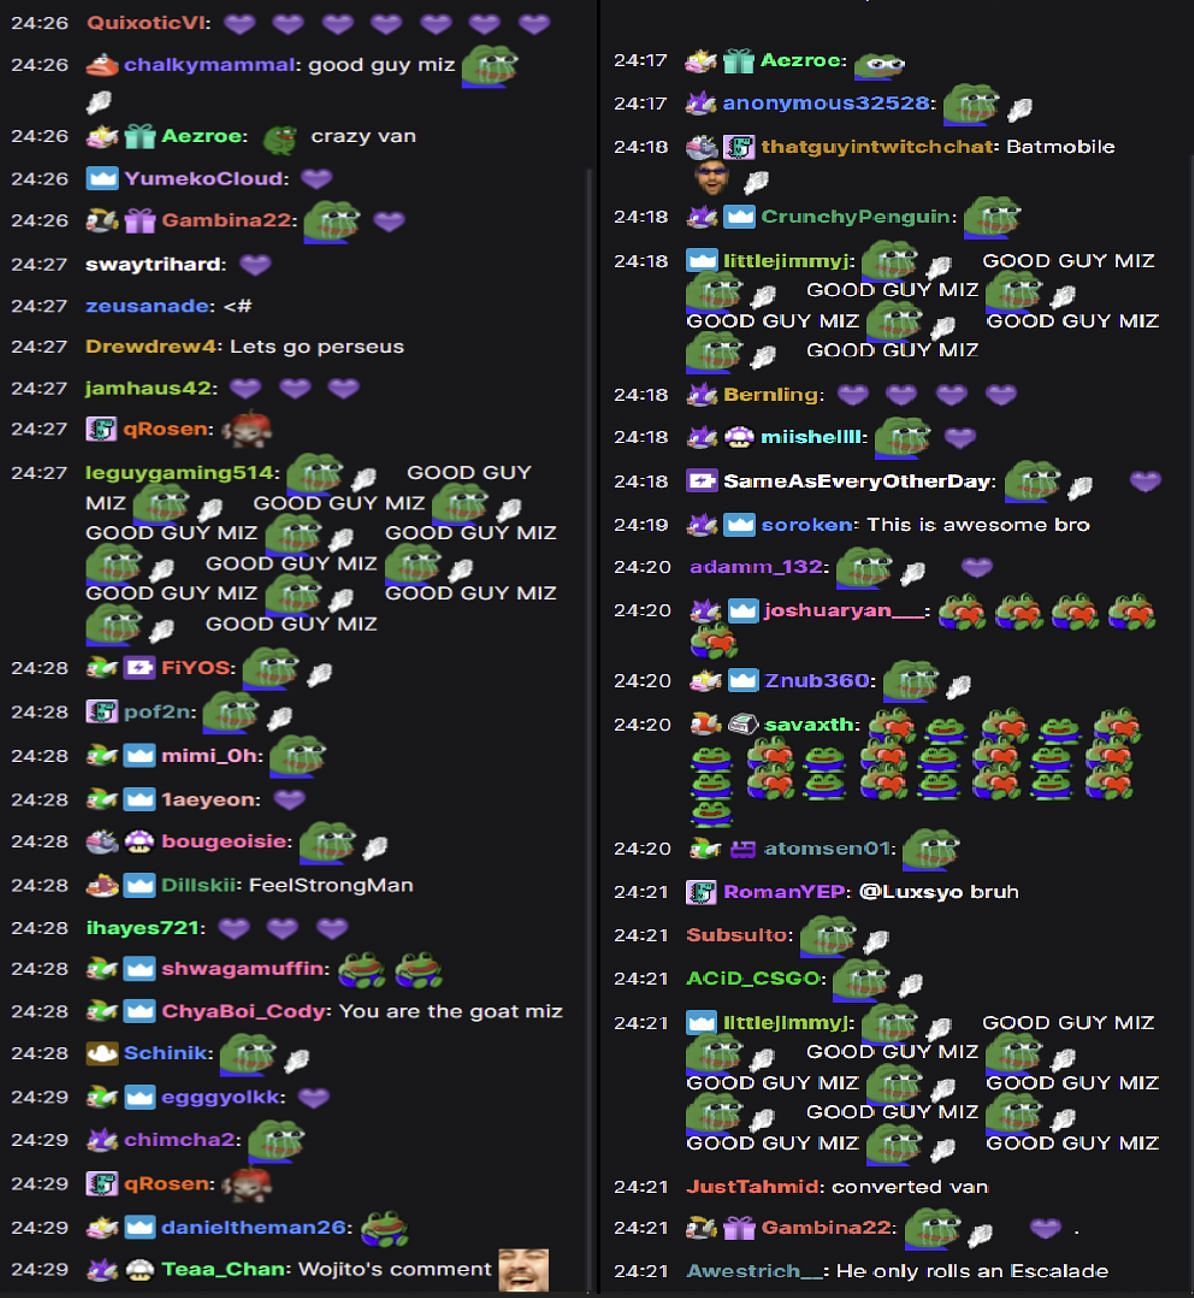 Fans in the Twitch chat reacting to the streamer&#039;s update (Images via Mizkif/Twitch chat)